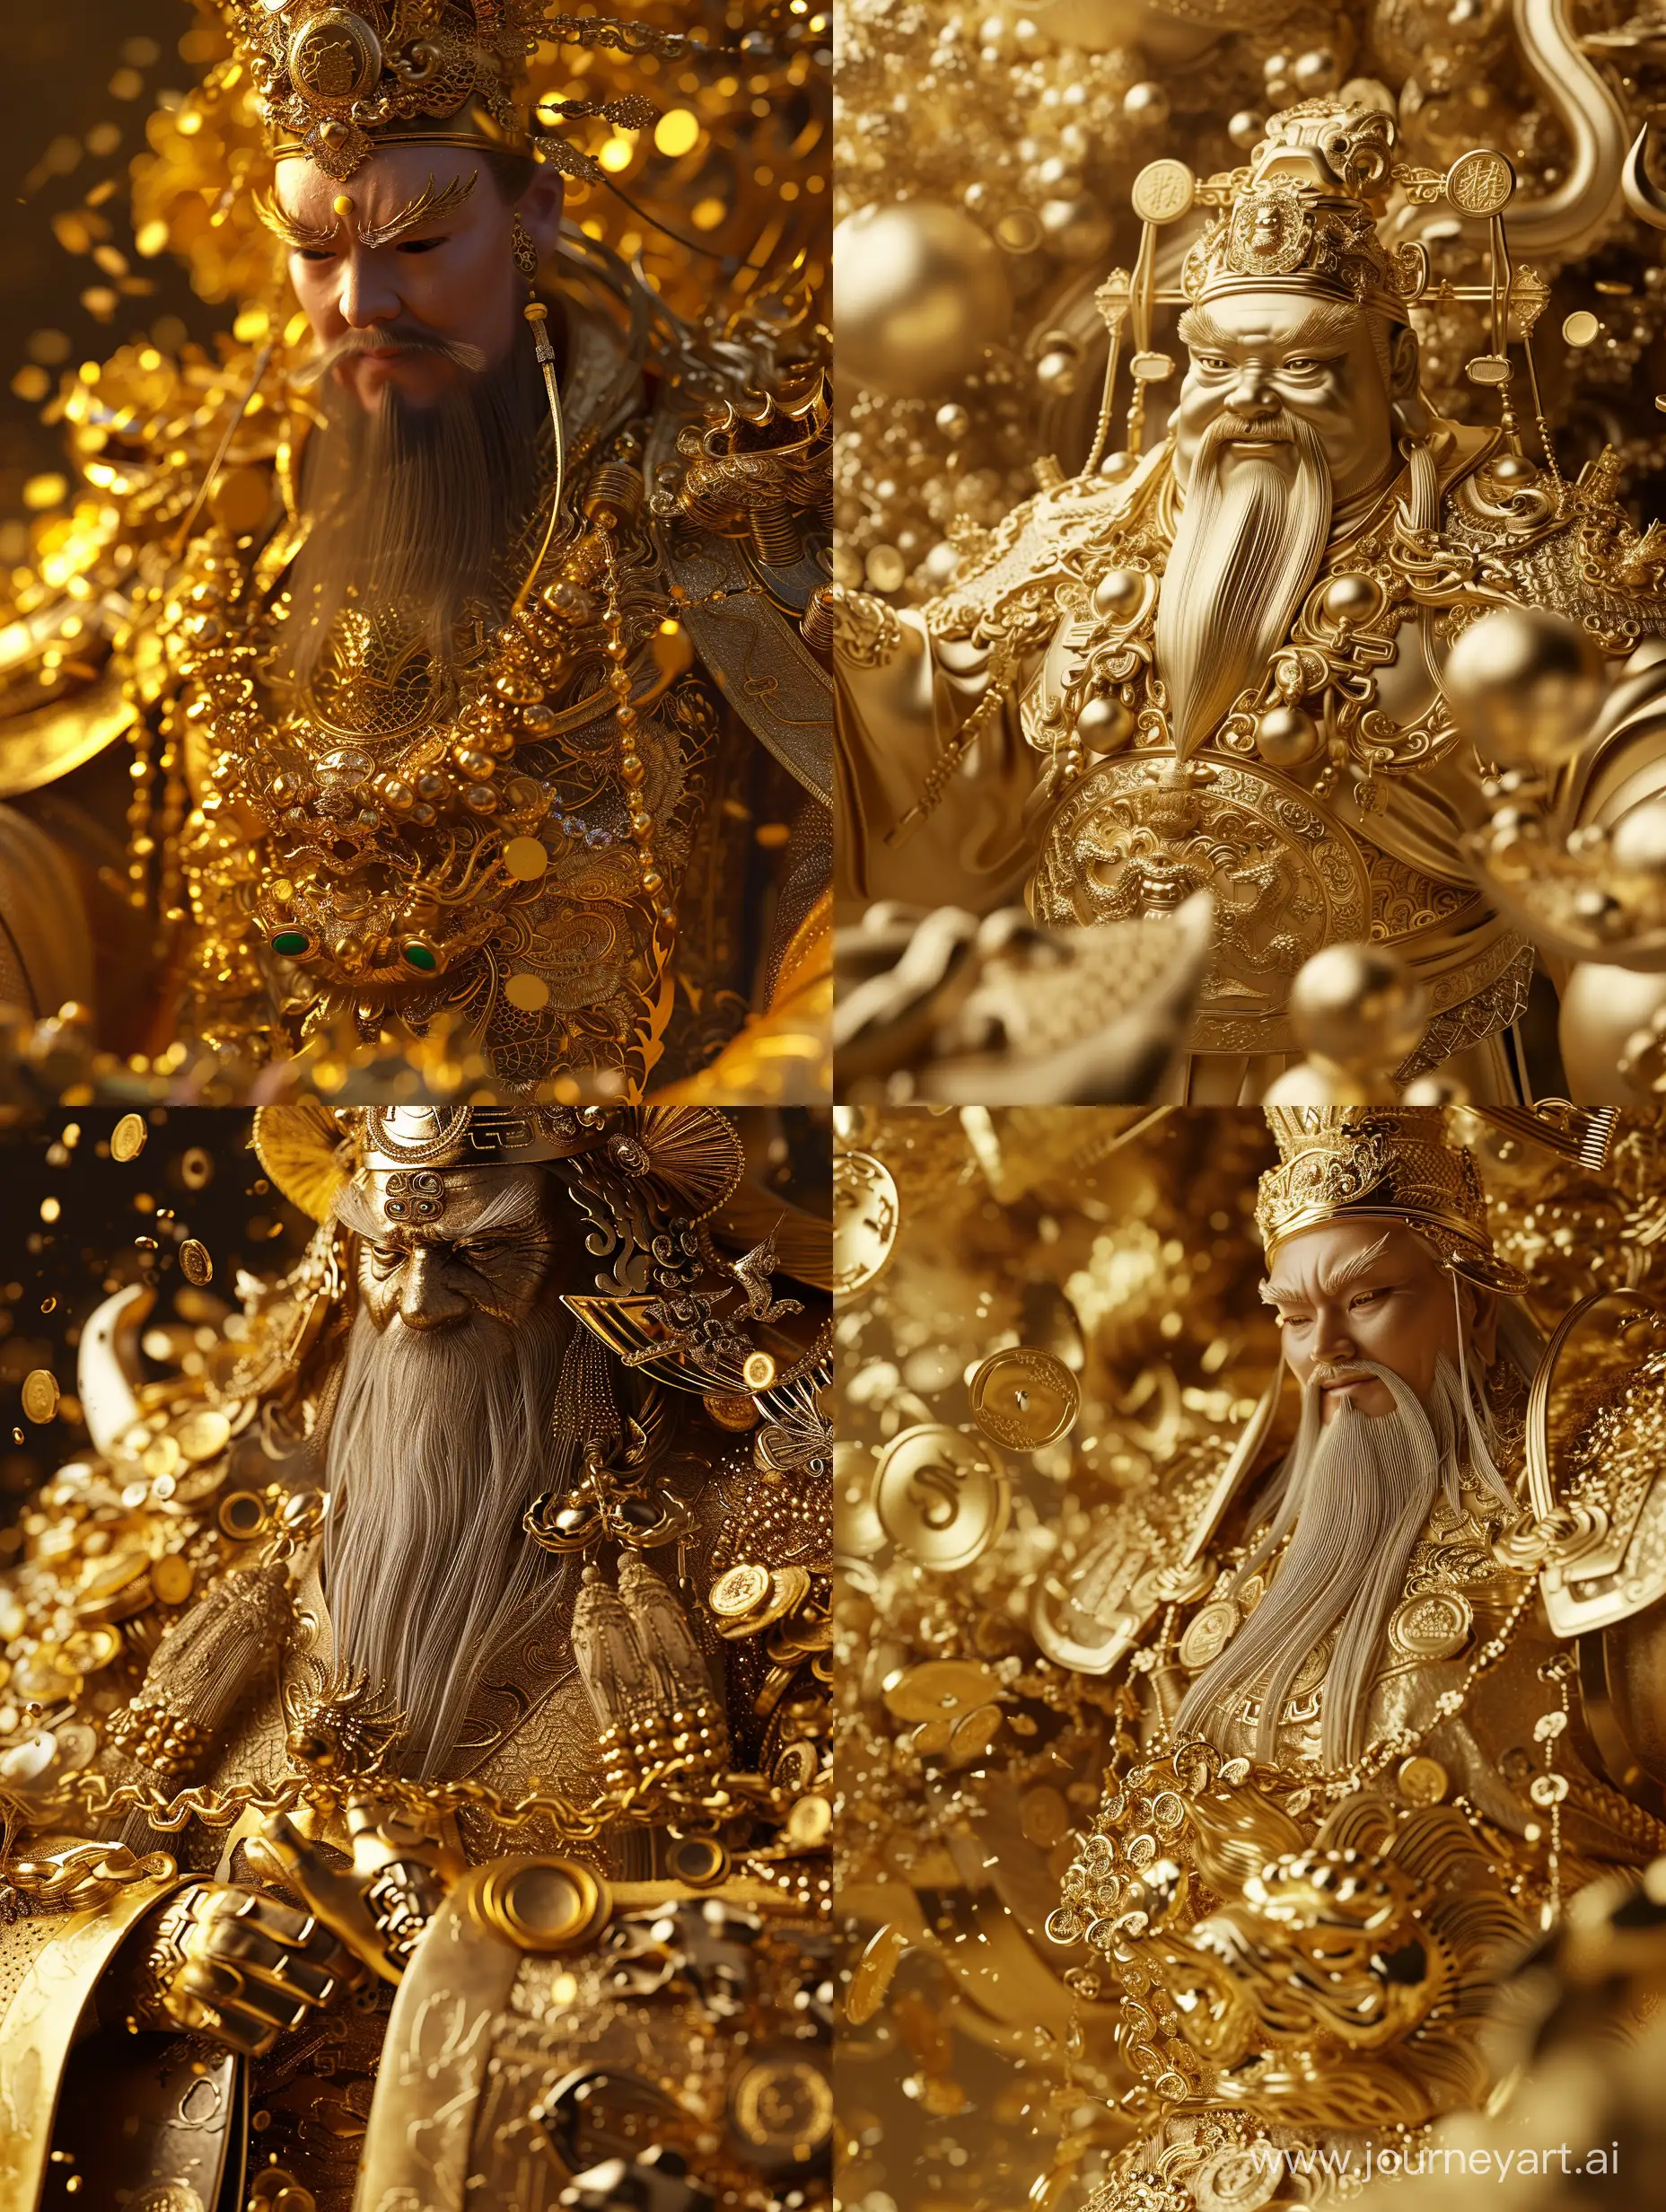 Chinese-God-of-Wealth-3D-Image-with-Golden-Clothing-and-Accessories